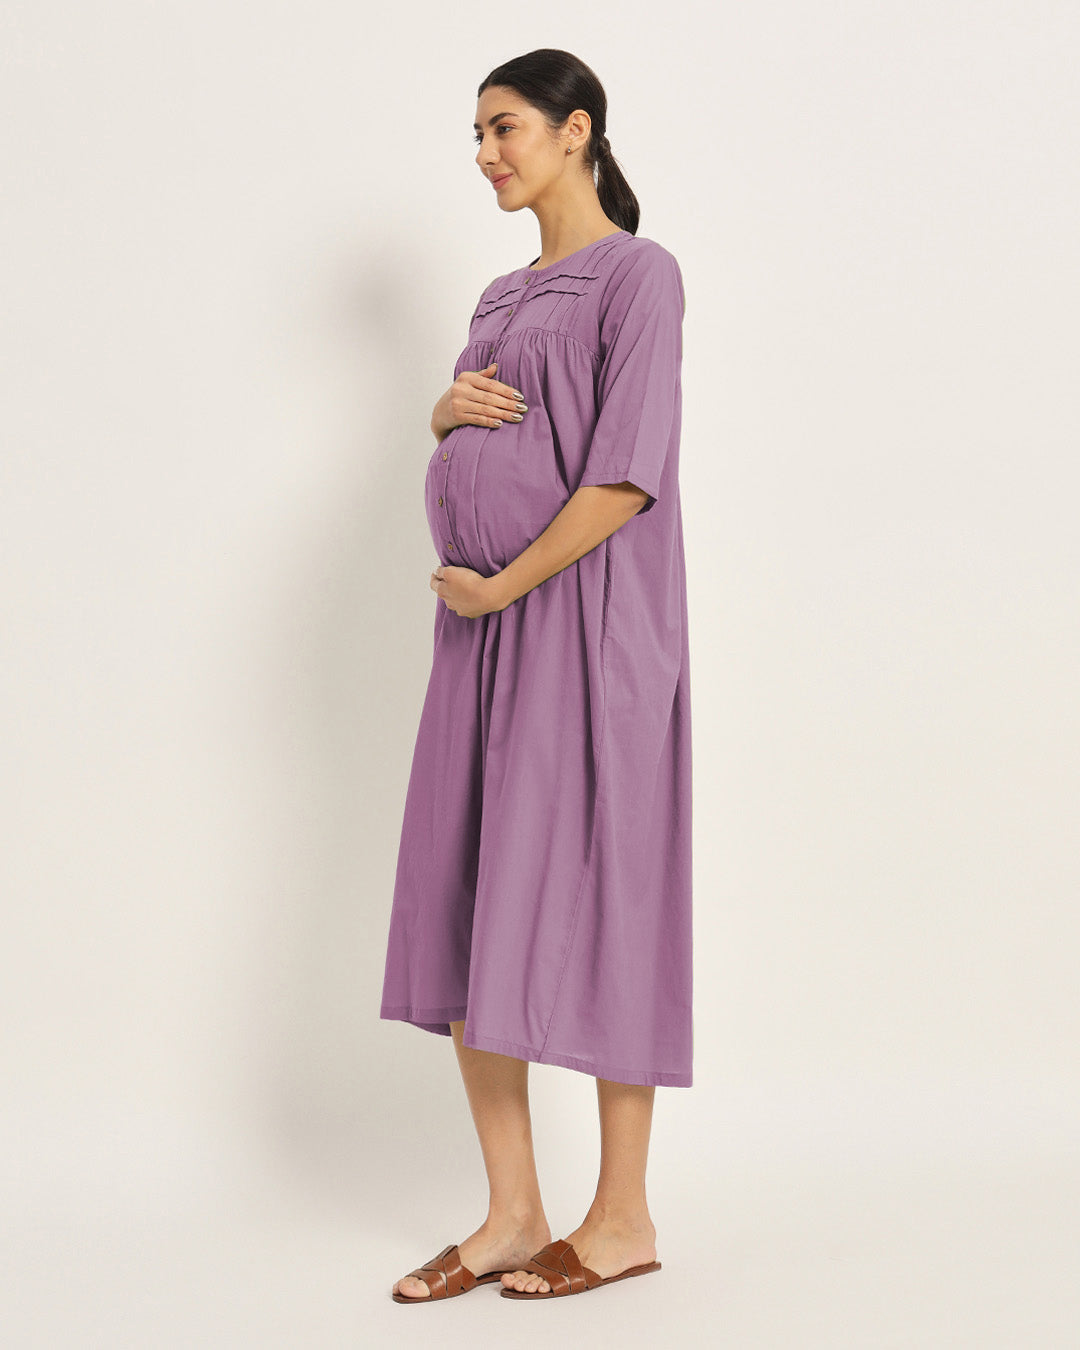 Combo: Iris Pink & Russet Red Mommy-to-Be Marvel Maternity & Nursing Dress